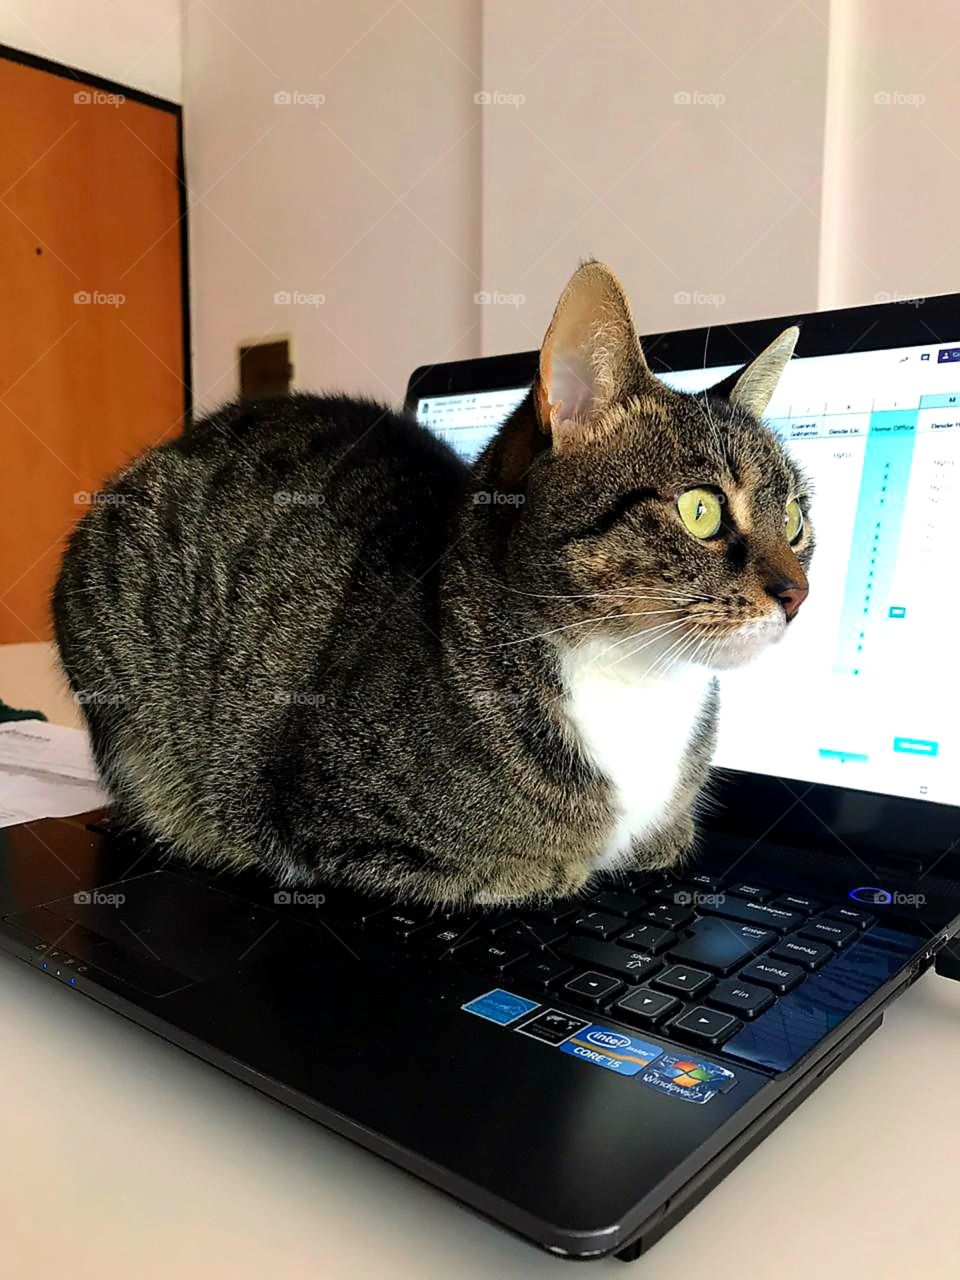 Home office cat